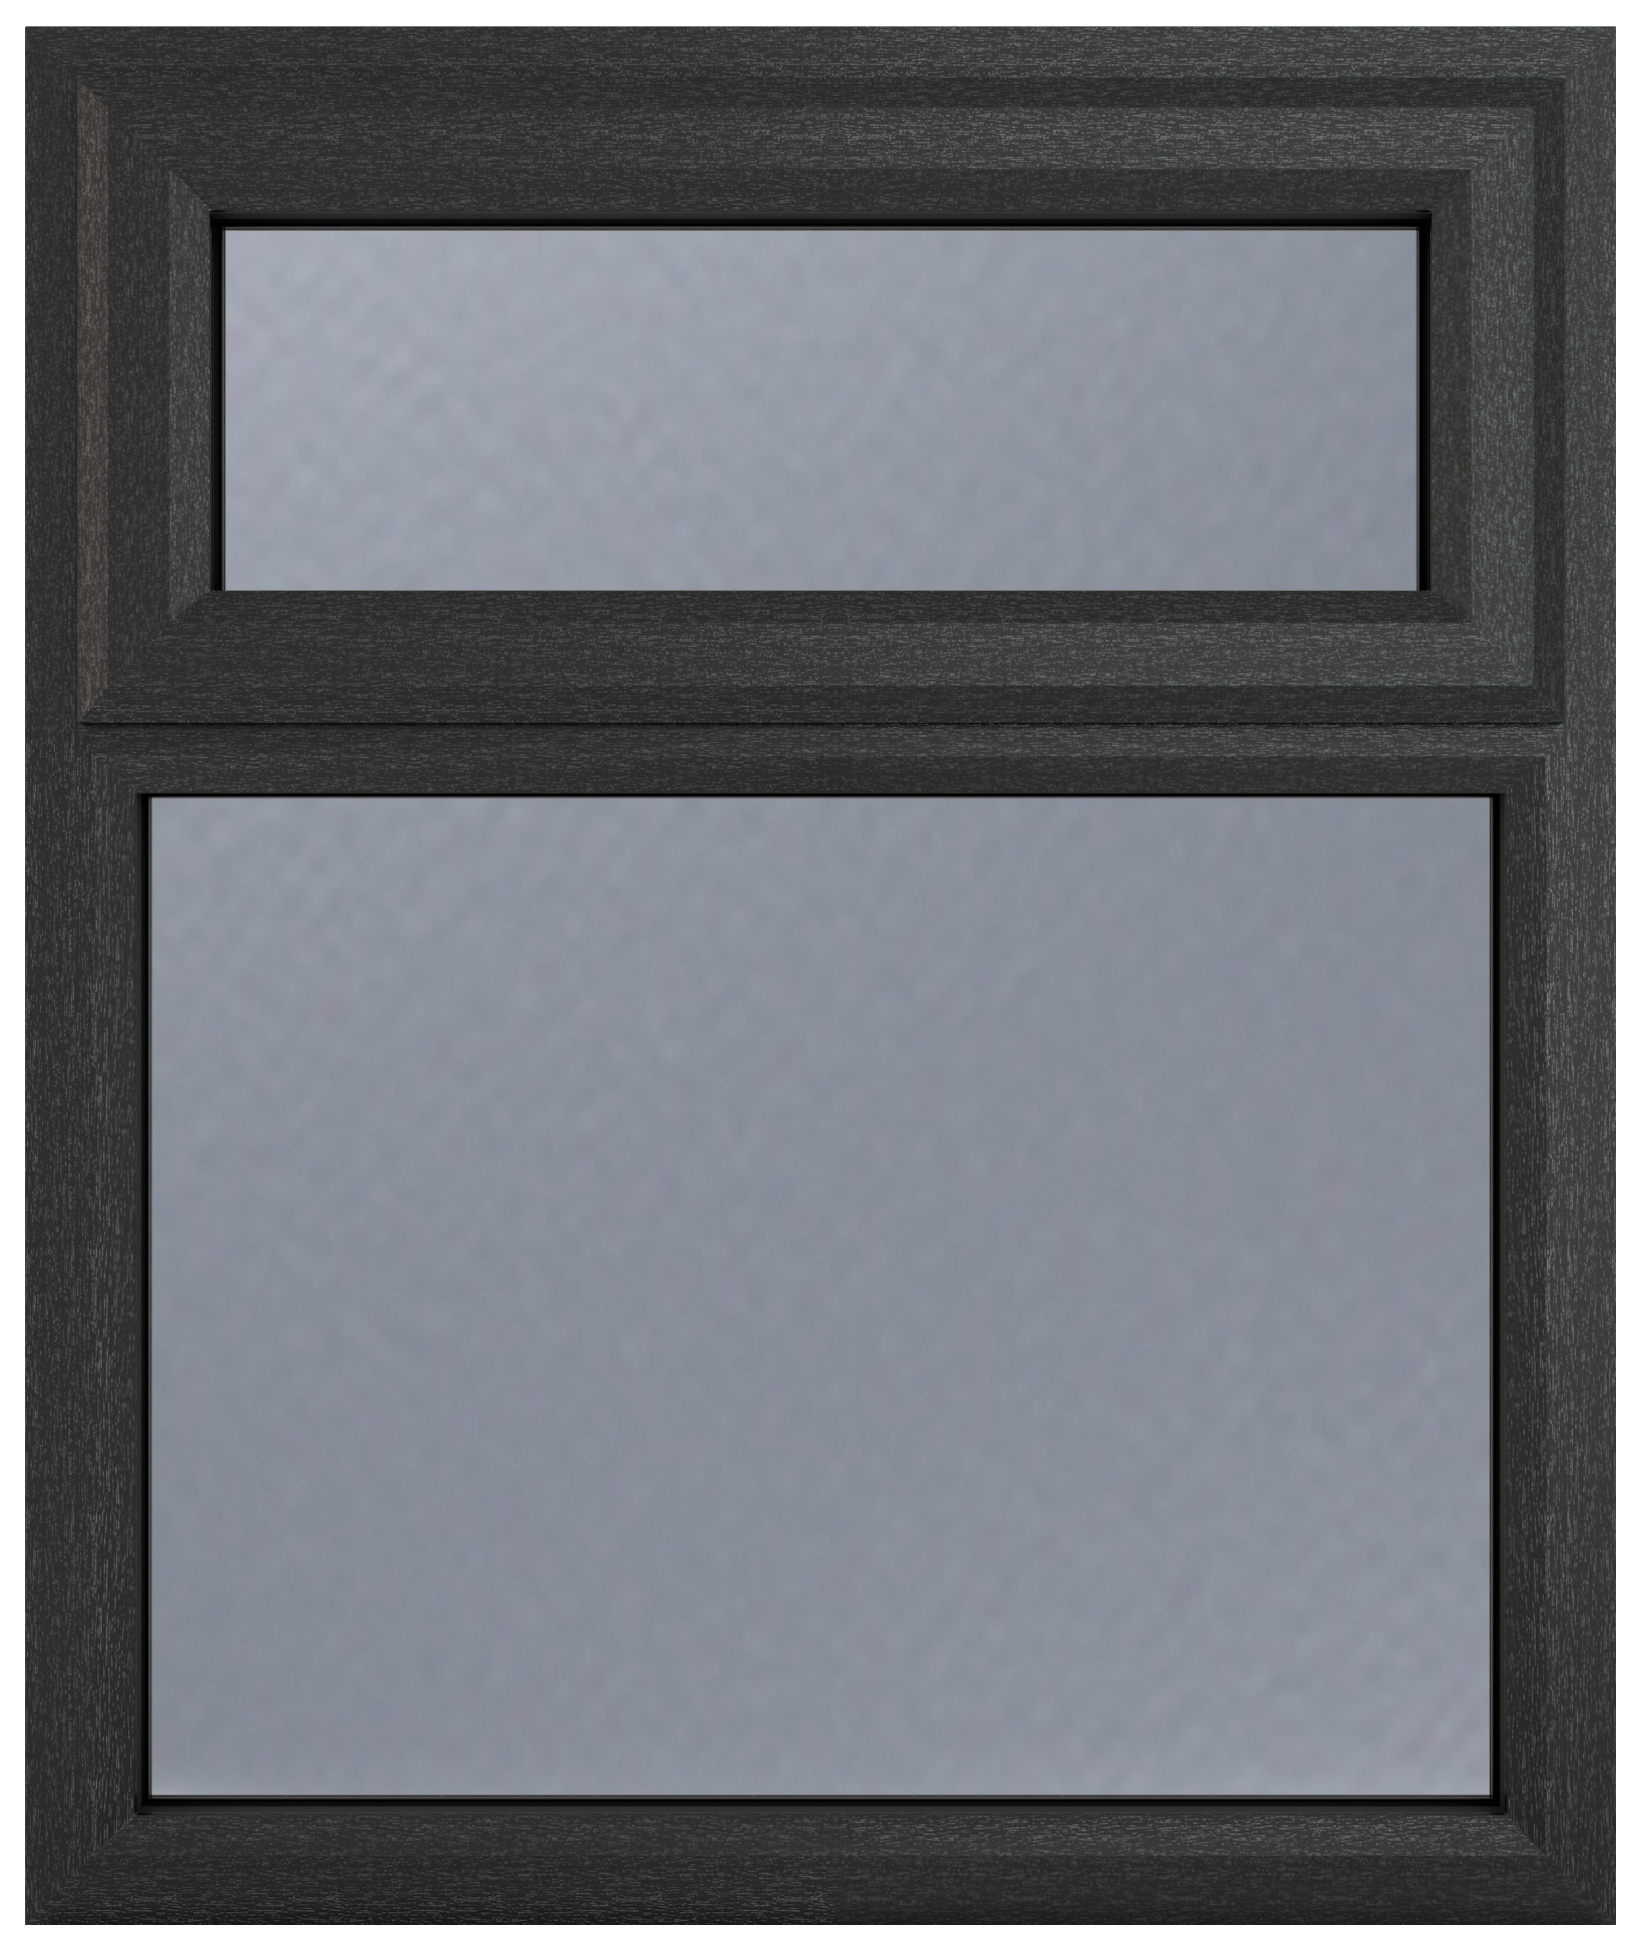 Crystal uPVC Grey Top Hung Opener Obscure Double Glazed Fixed Light Window - 1190 x 965mm